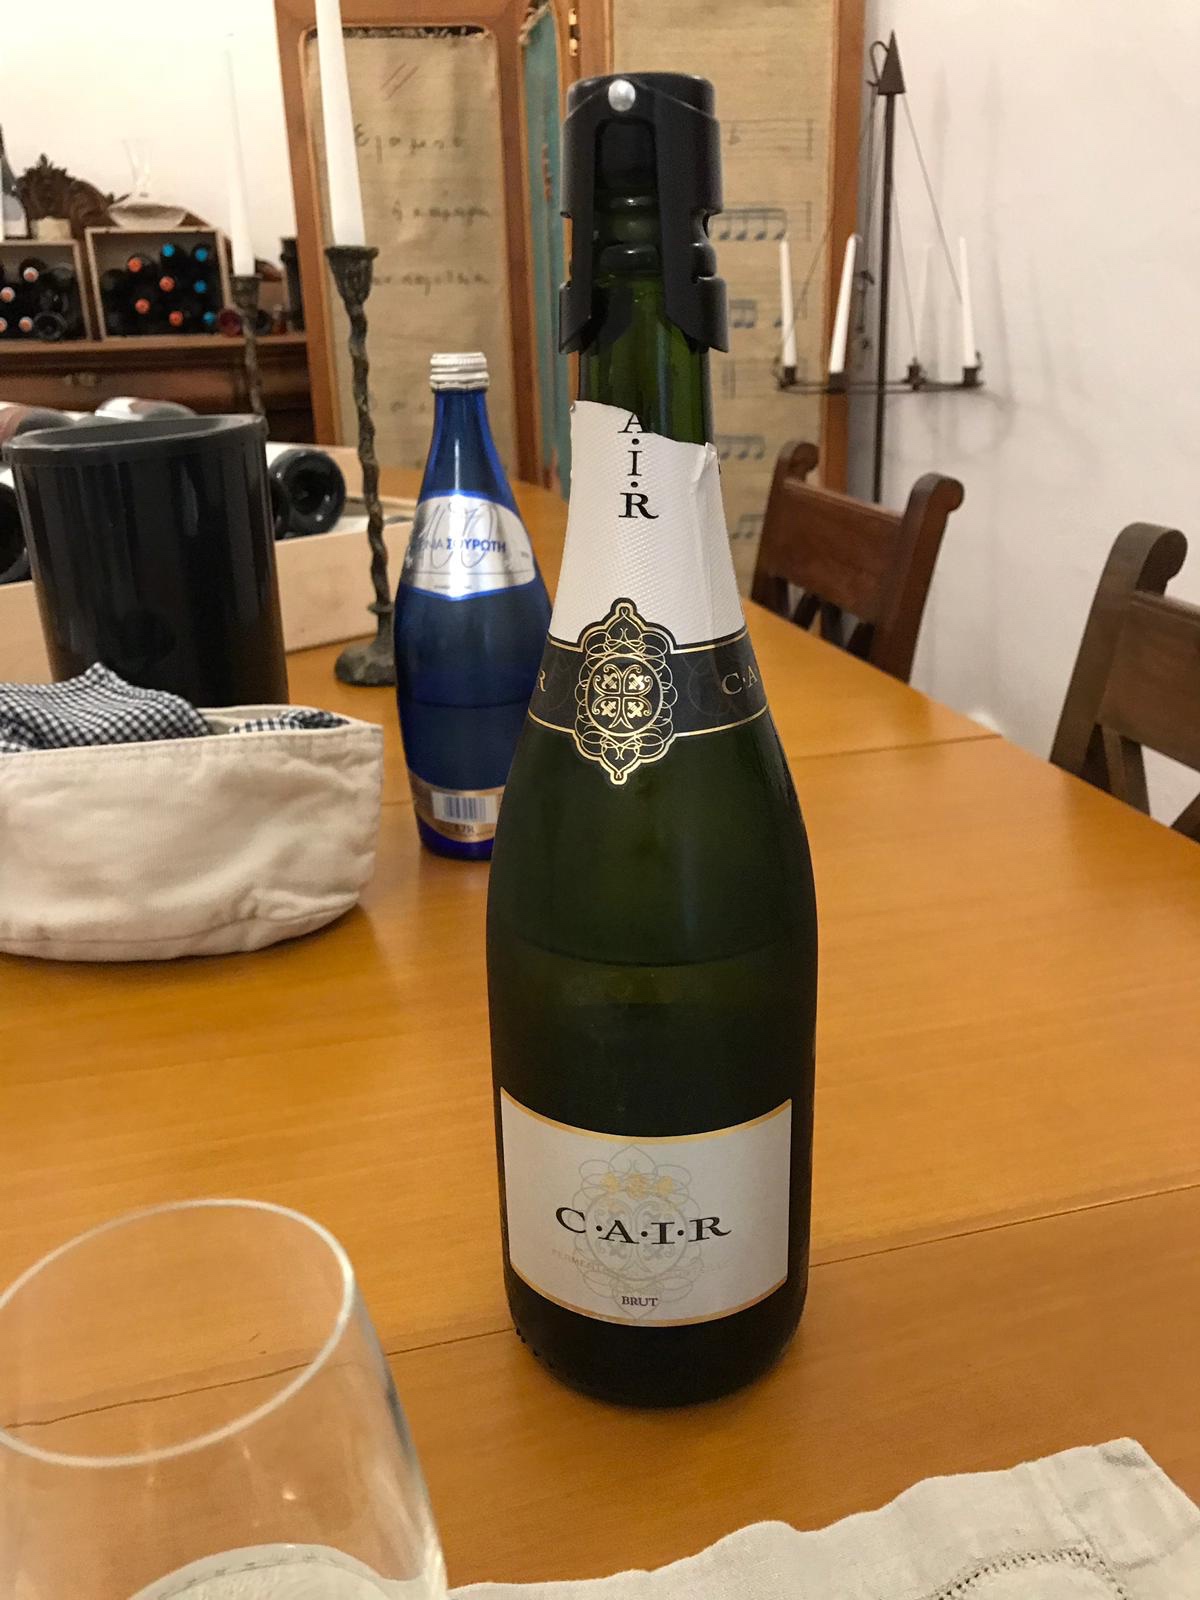 A sparkling wine from Rhodes - Cair, very drinkable